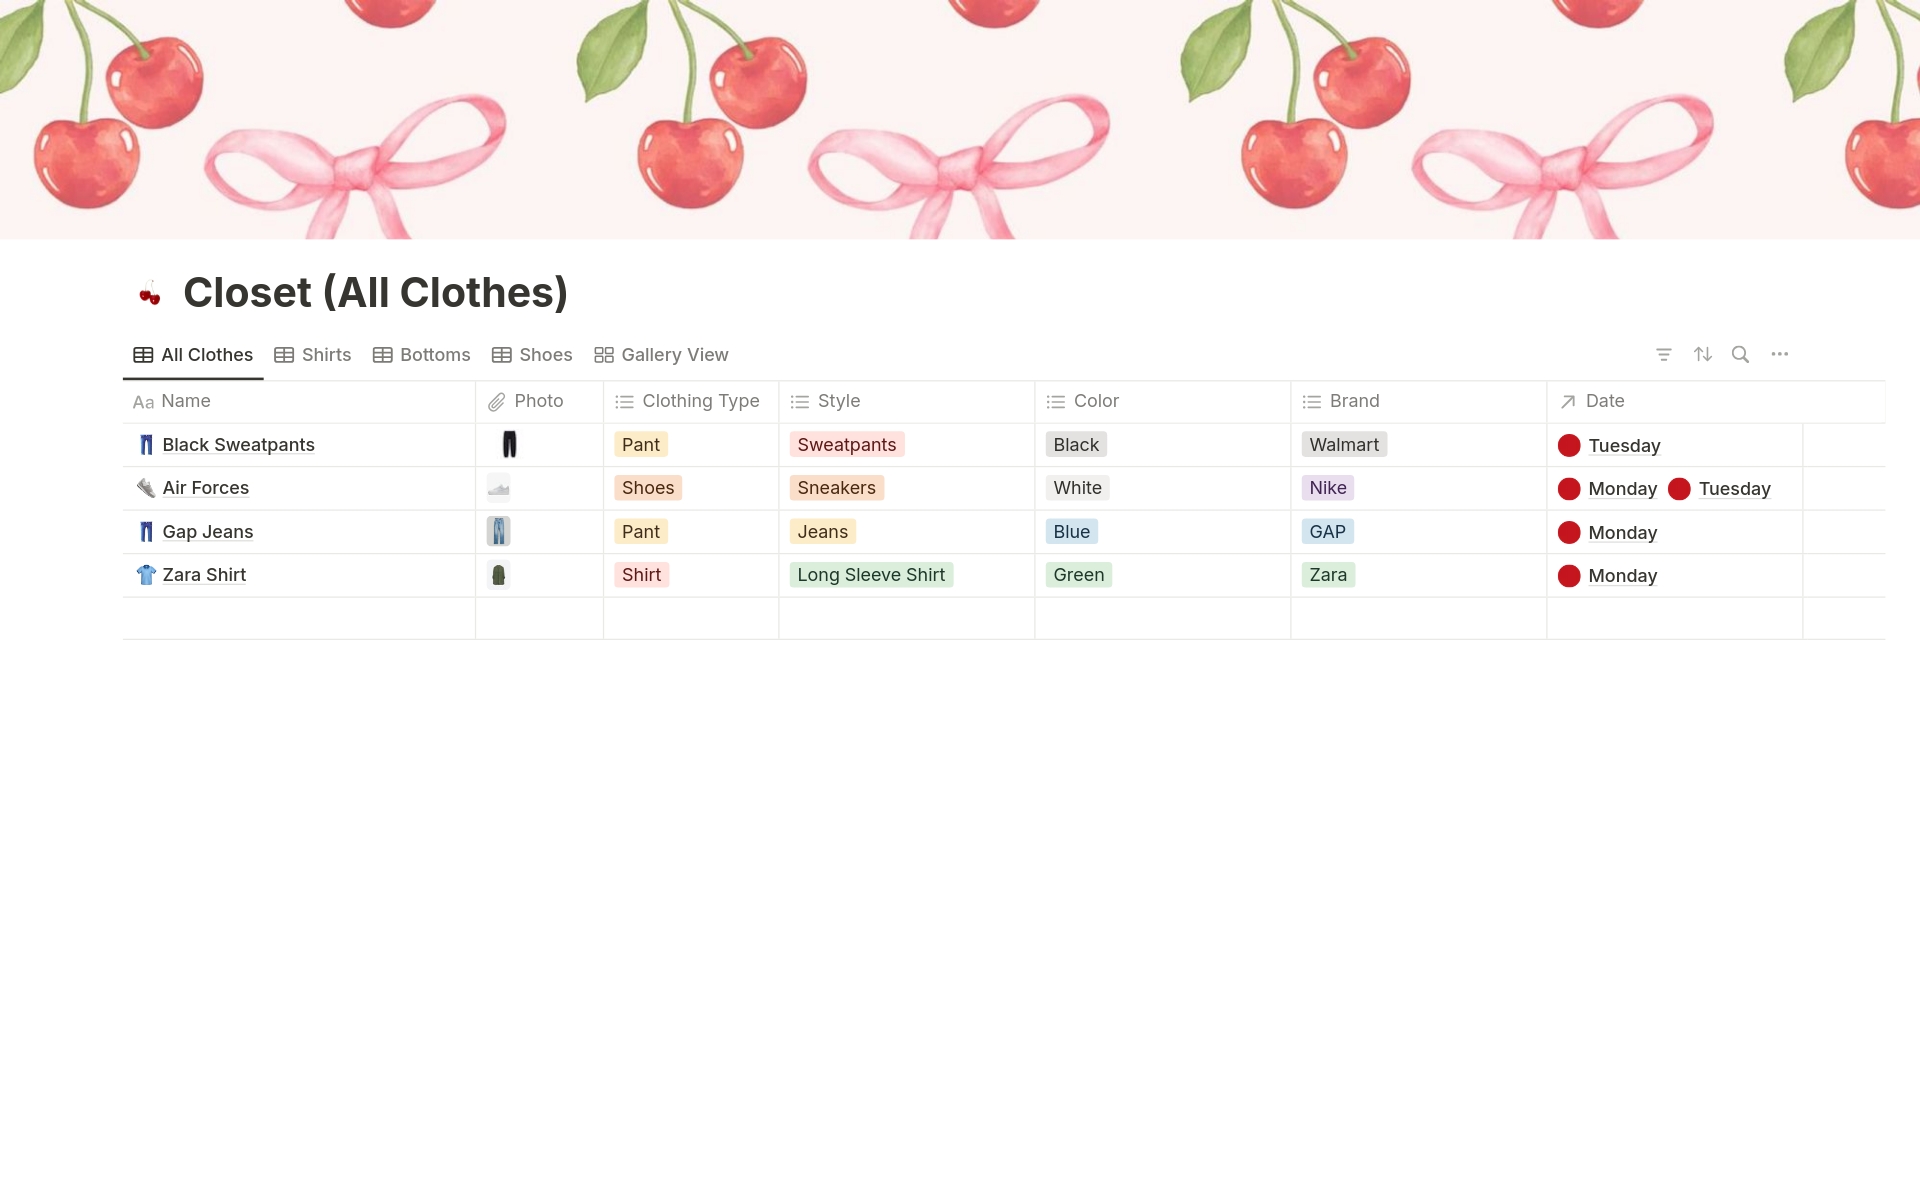 This template is a great way for you to log all your clothing items, create weekly outfits, and add items to a personal wishlist.